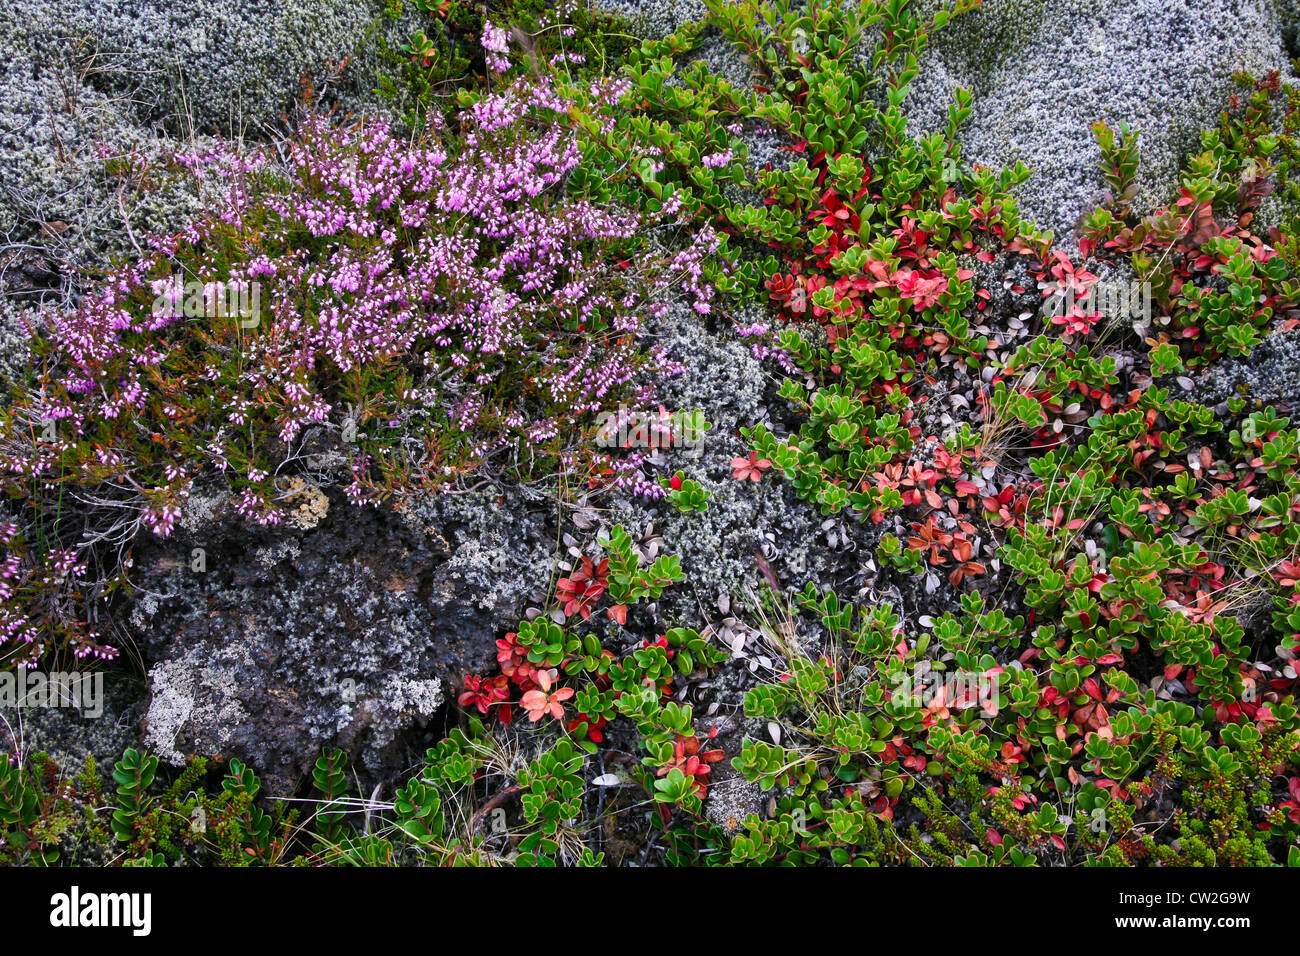 Wild thyme,Thymus praecox subsp. articus, and Reindeer Lichen and other vegetation growing over lava rocks in Iceland, Europe, botanicals, earth image Stock Photo